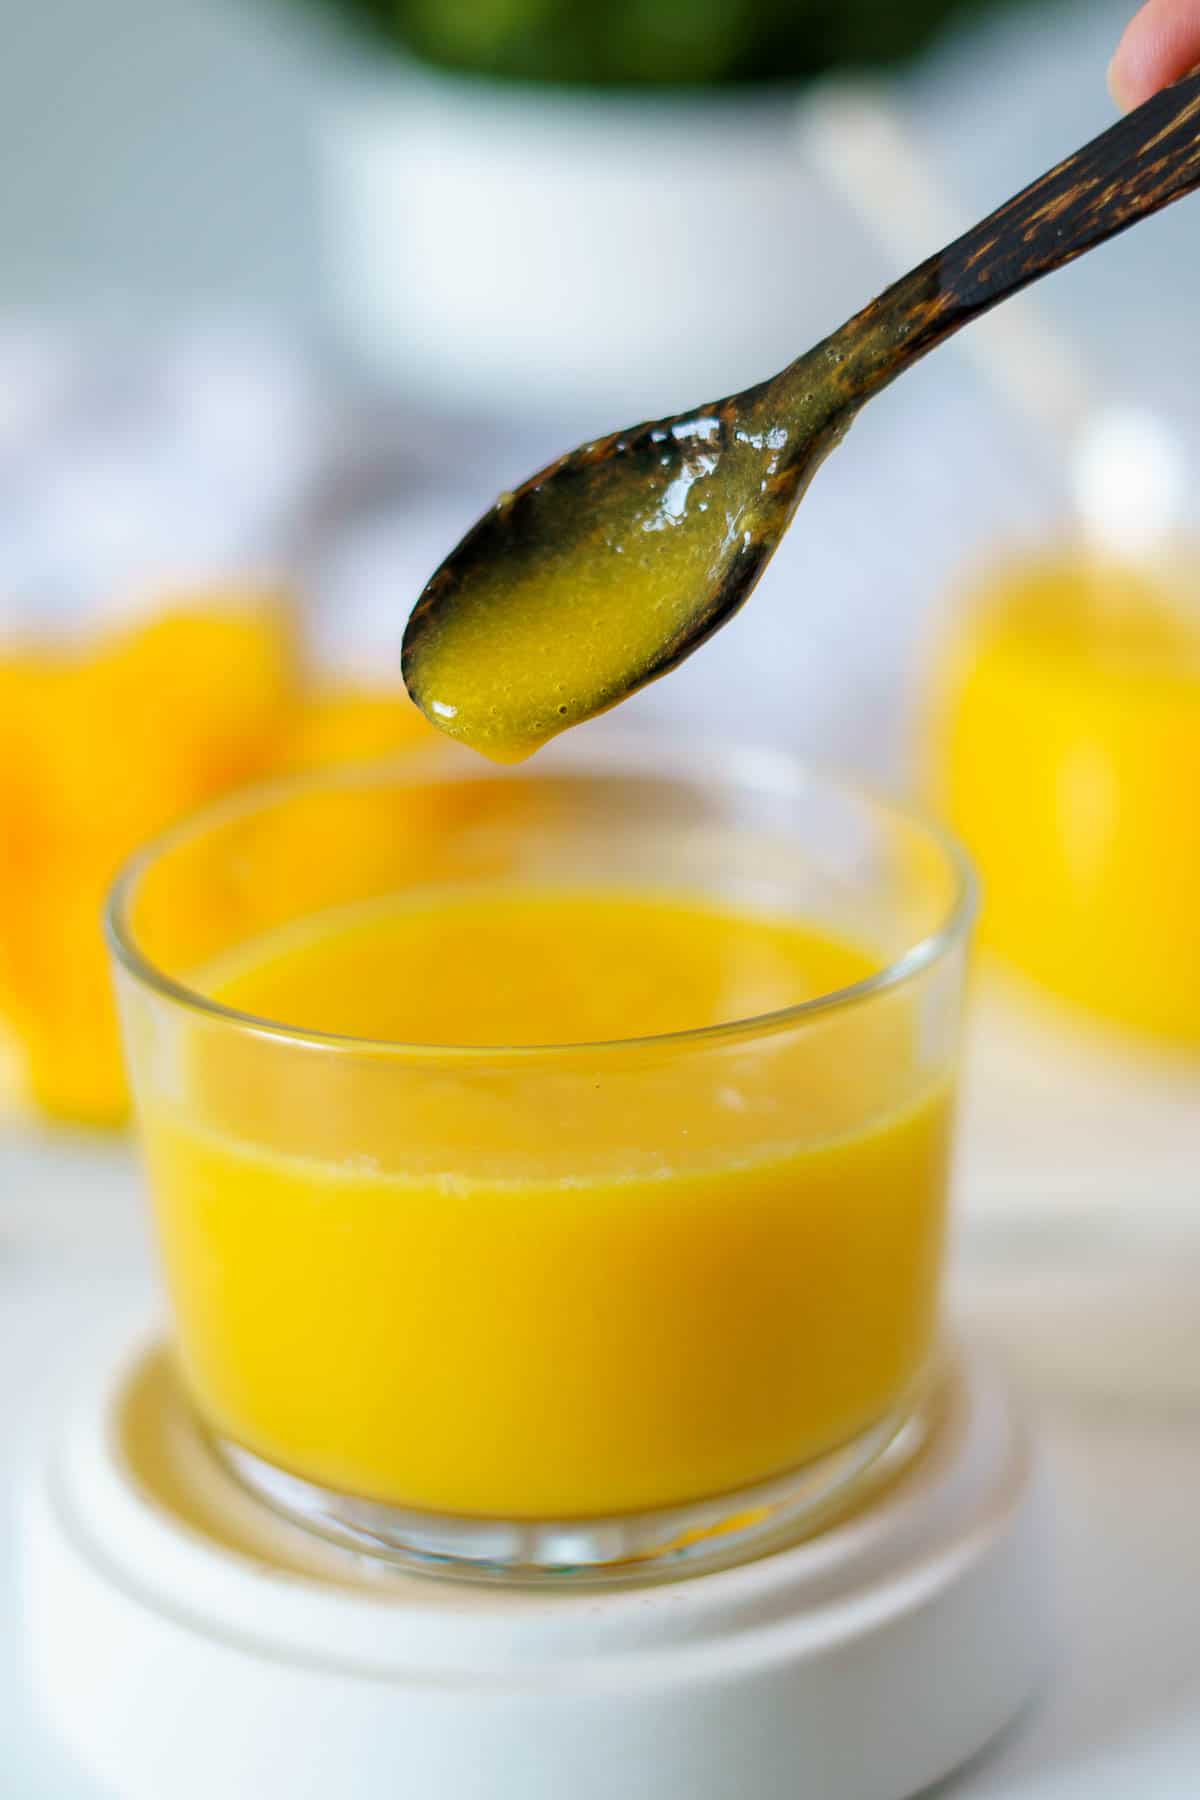 mango nectar being spooned from a jar.  